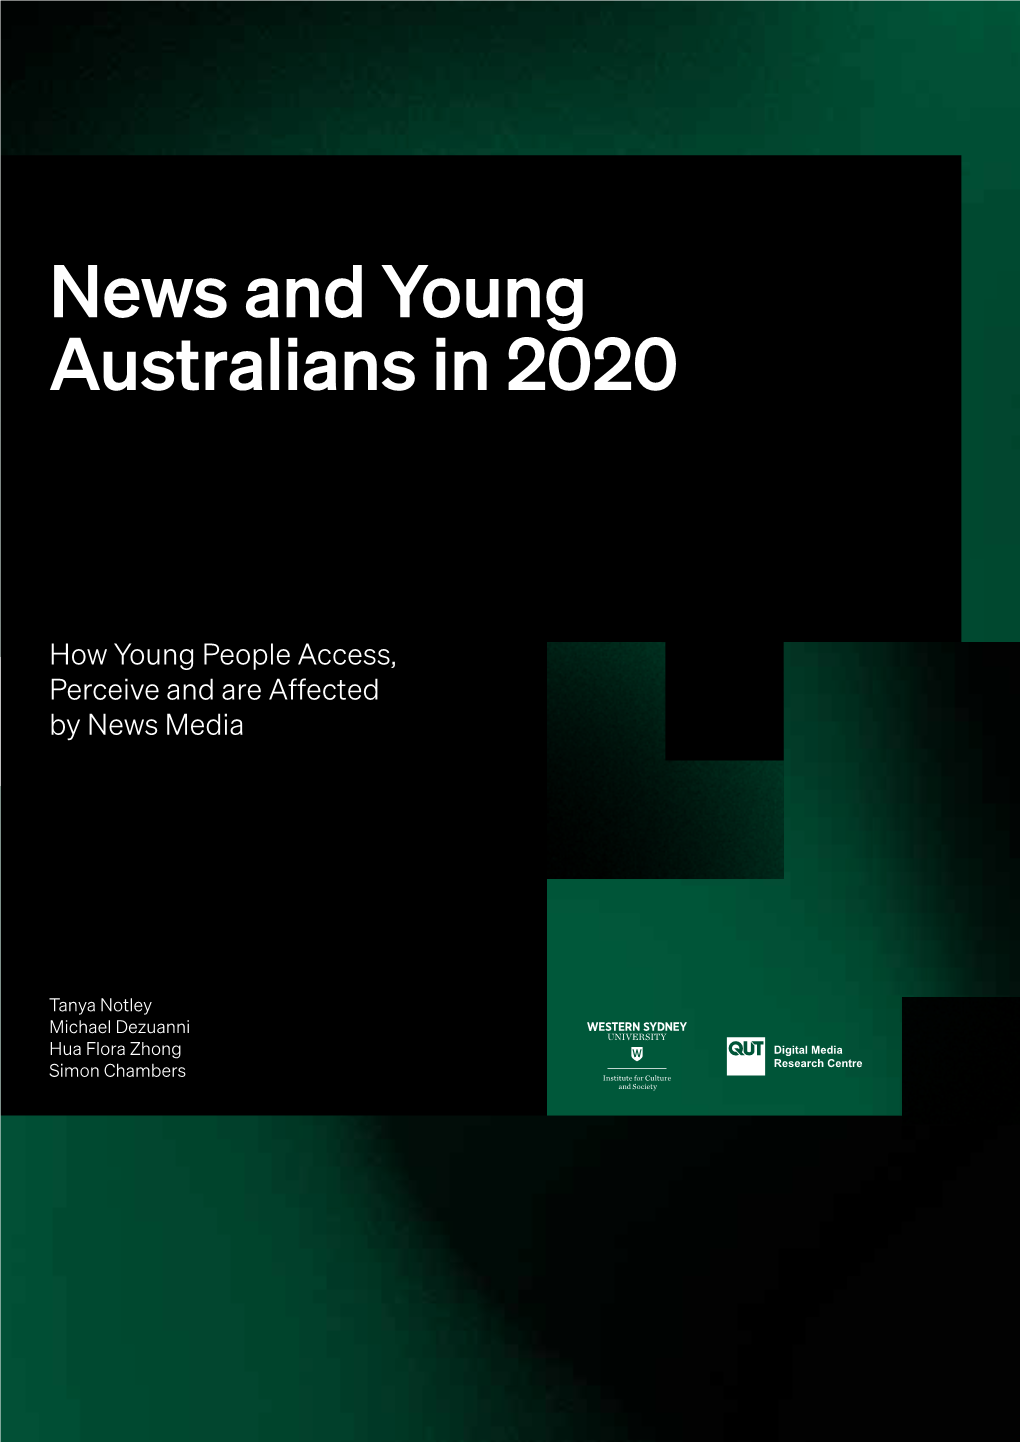 News and Young Australians in 2020